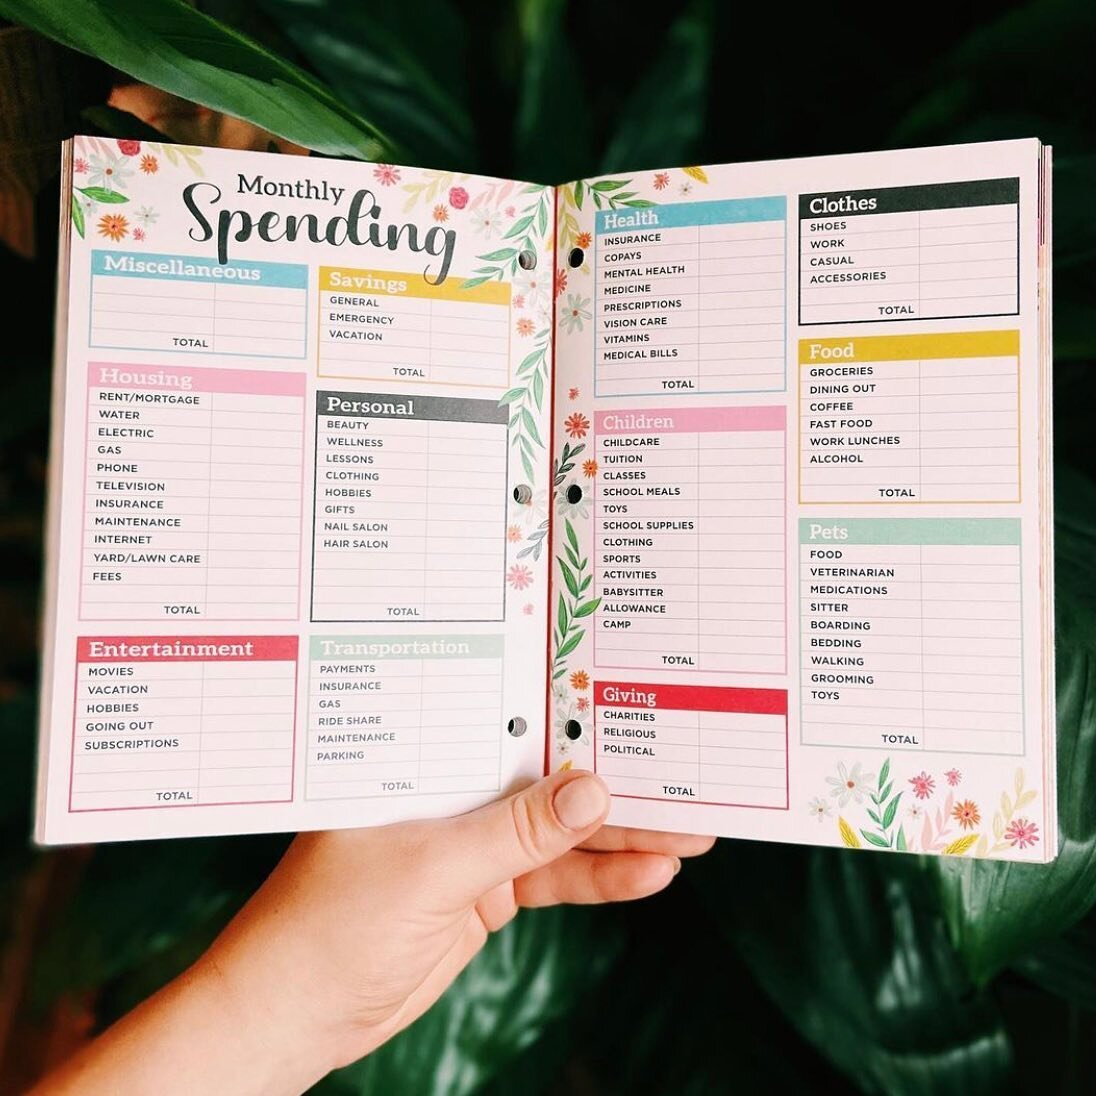 Get your life back on budget! Budget planners are available at Walmart and Walmart.com! Check out the link in our bio to get yours!
.
#planner #budgetplanner #budgeting #plannercommunity #planneraddict #plannerbabe #walmartfinds #walmart #stationery 